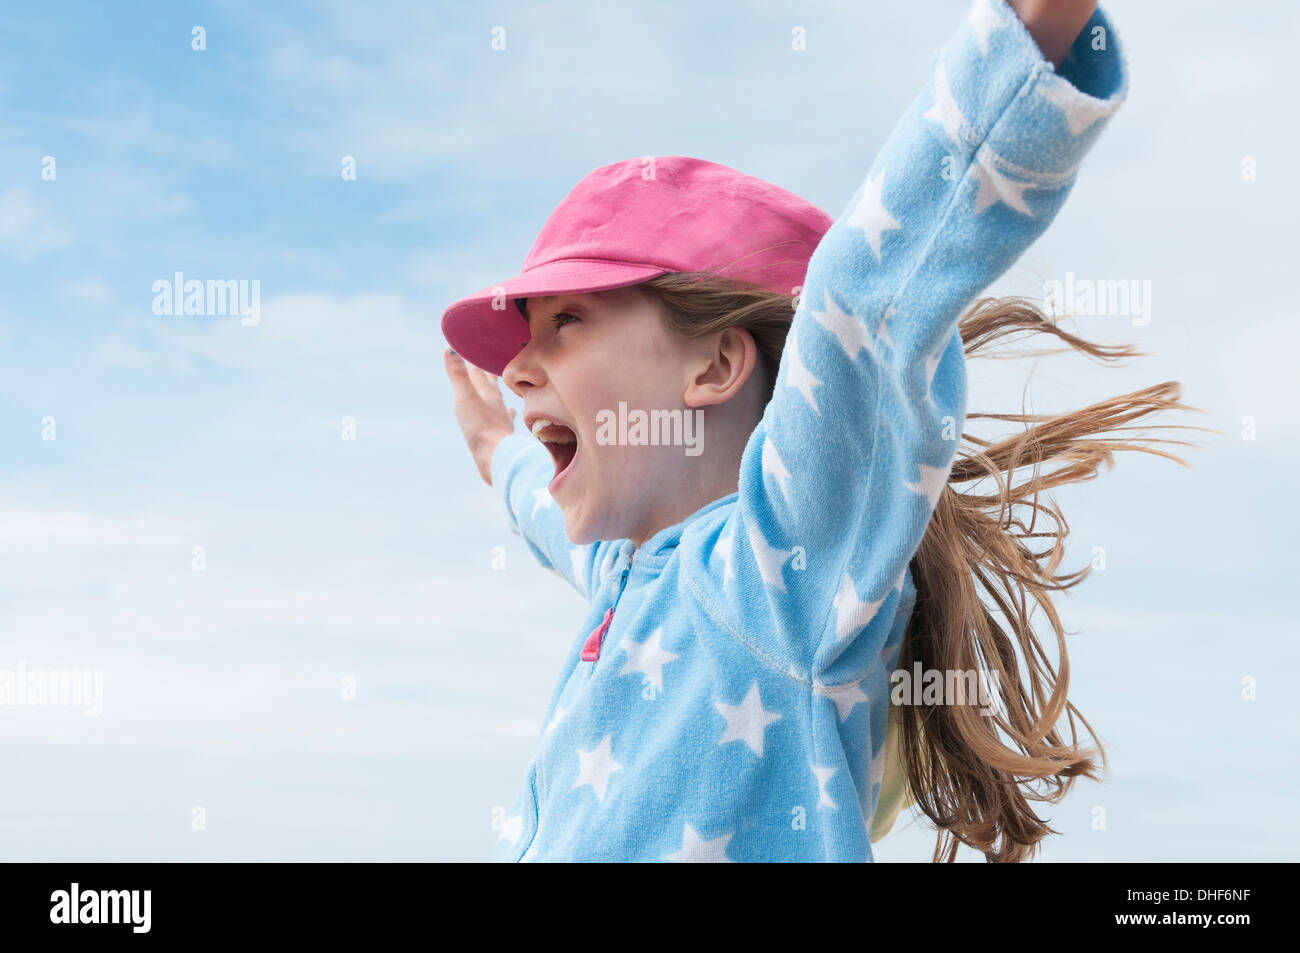 Girl wearing pink cap with arms raised in wind Stock Photo